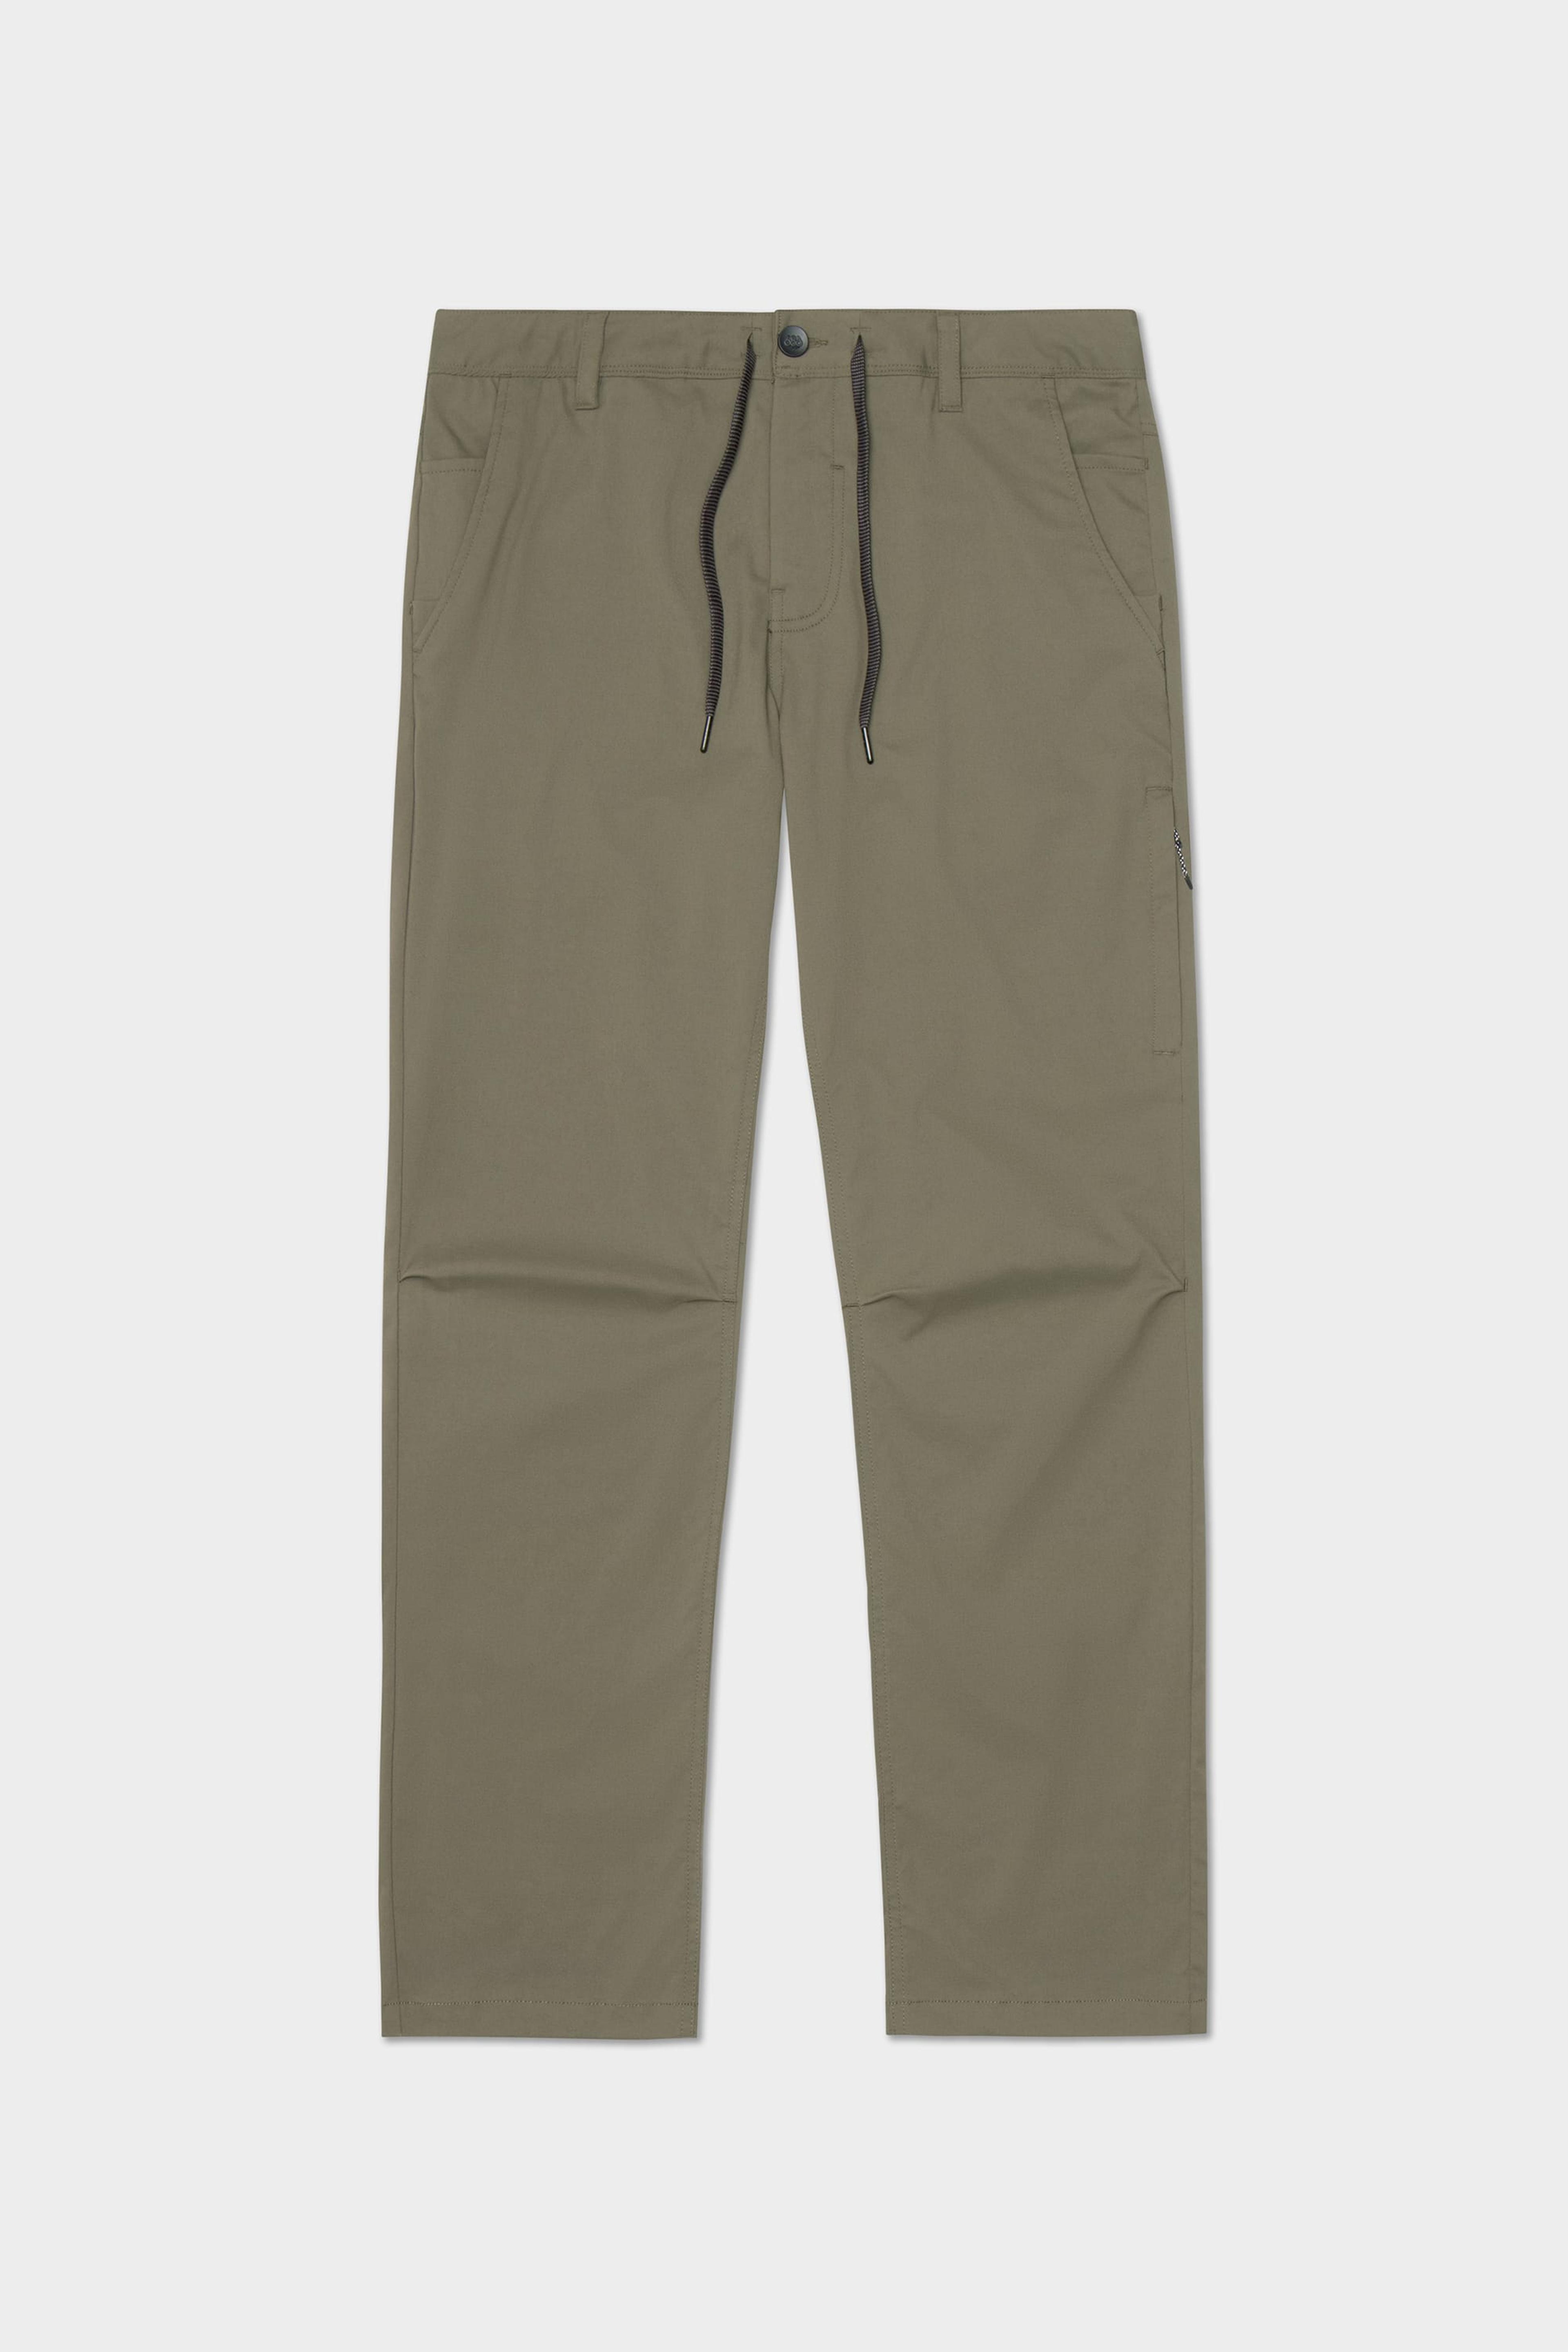 Alternate View 49 of 686 Men's Everywhere Pant - Relaxed Fit